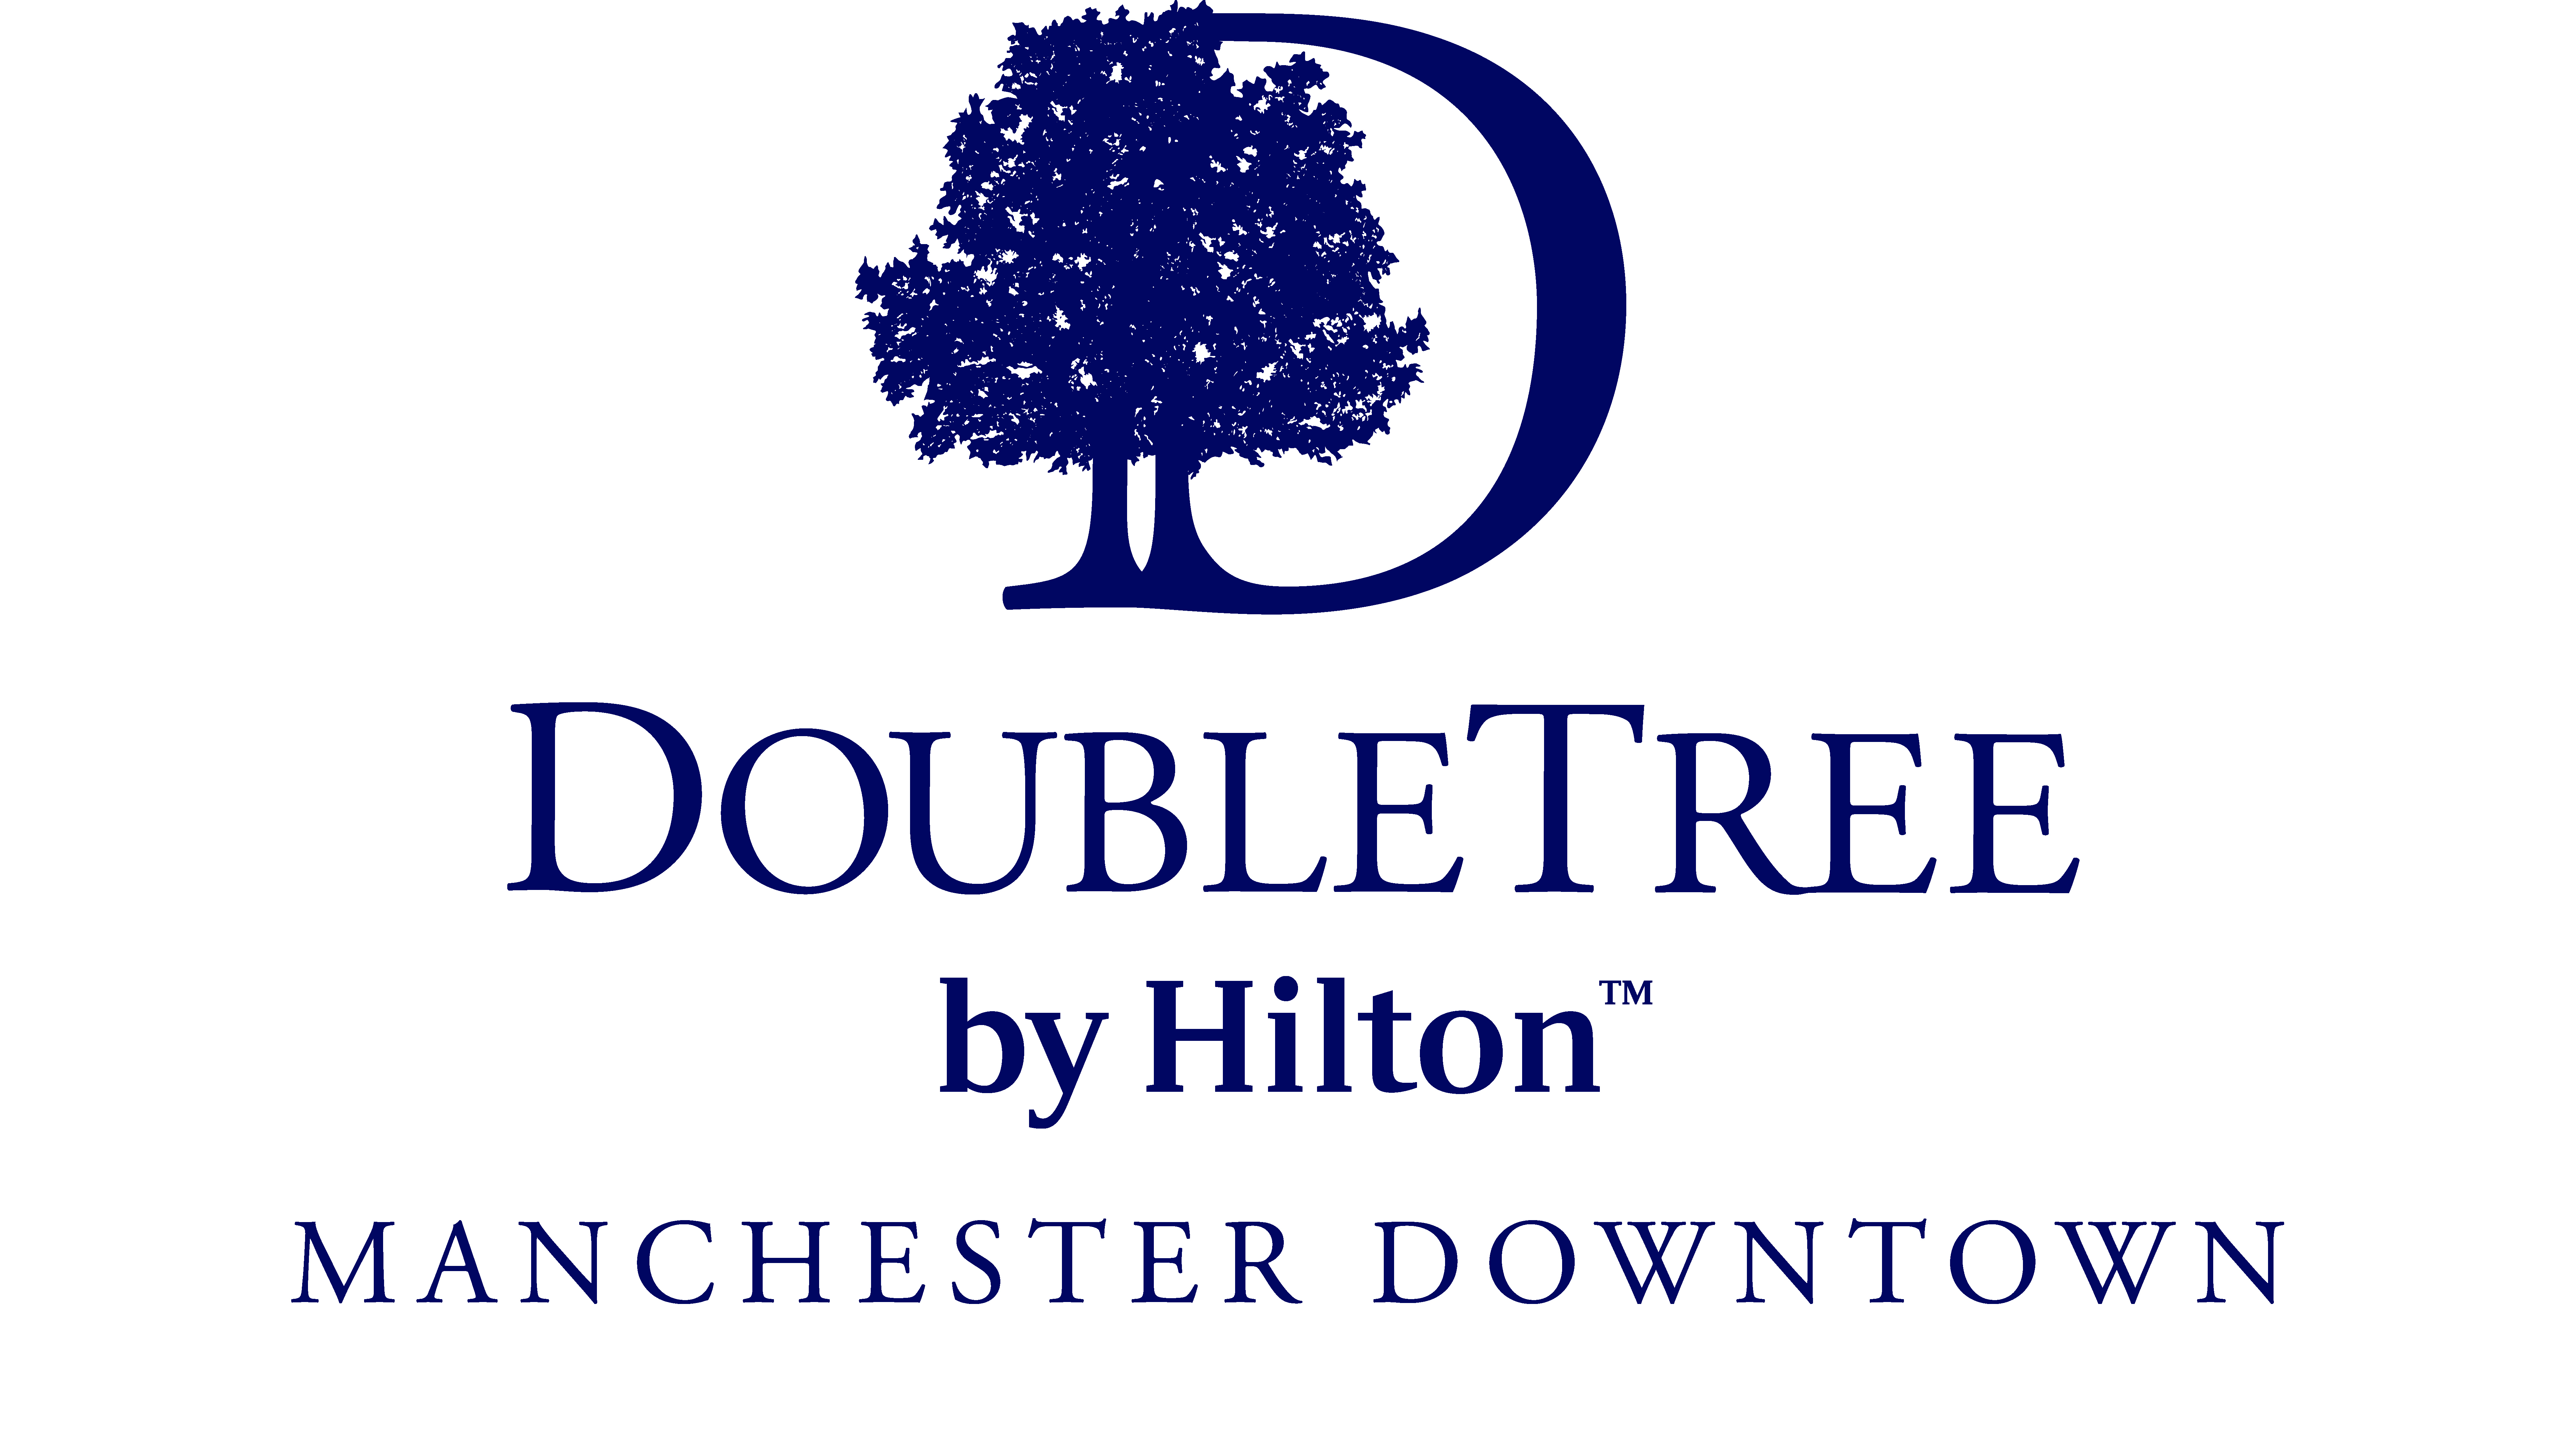 DoubleTree by Hilton Manchester Downtown logo